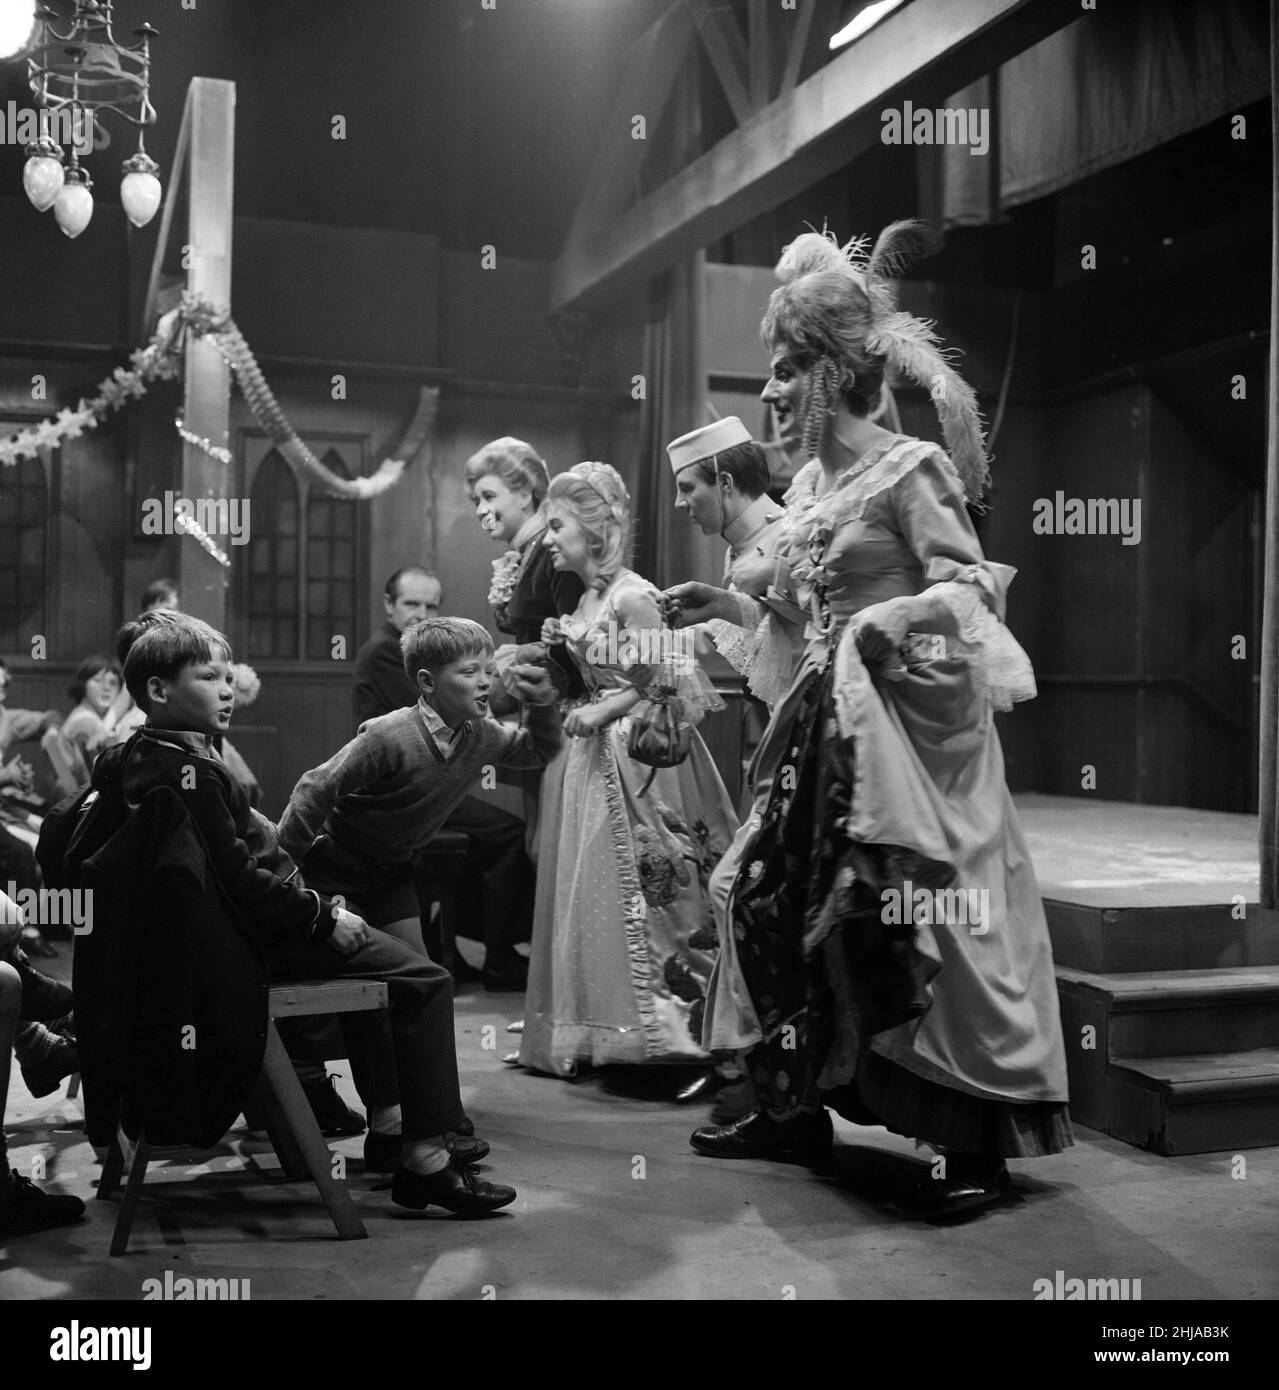 When 45 children from Wood Street Mission in Manchester were invited to take part in a 'Coronation Street' pantomime they really had a 'Cinderella' ball. Pat Phoenix (Elsie Tanner), Jennifer Moss (Lucille Hewitt), Philip Lowrie (Dennis Tanner) and Gordon Rollings (Charlie Moffitt) in their panto costumes entertain the children during rehearsals. 18th December 1964. Stock Photo